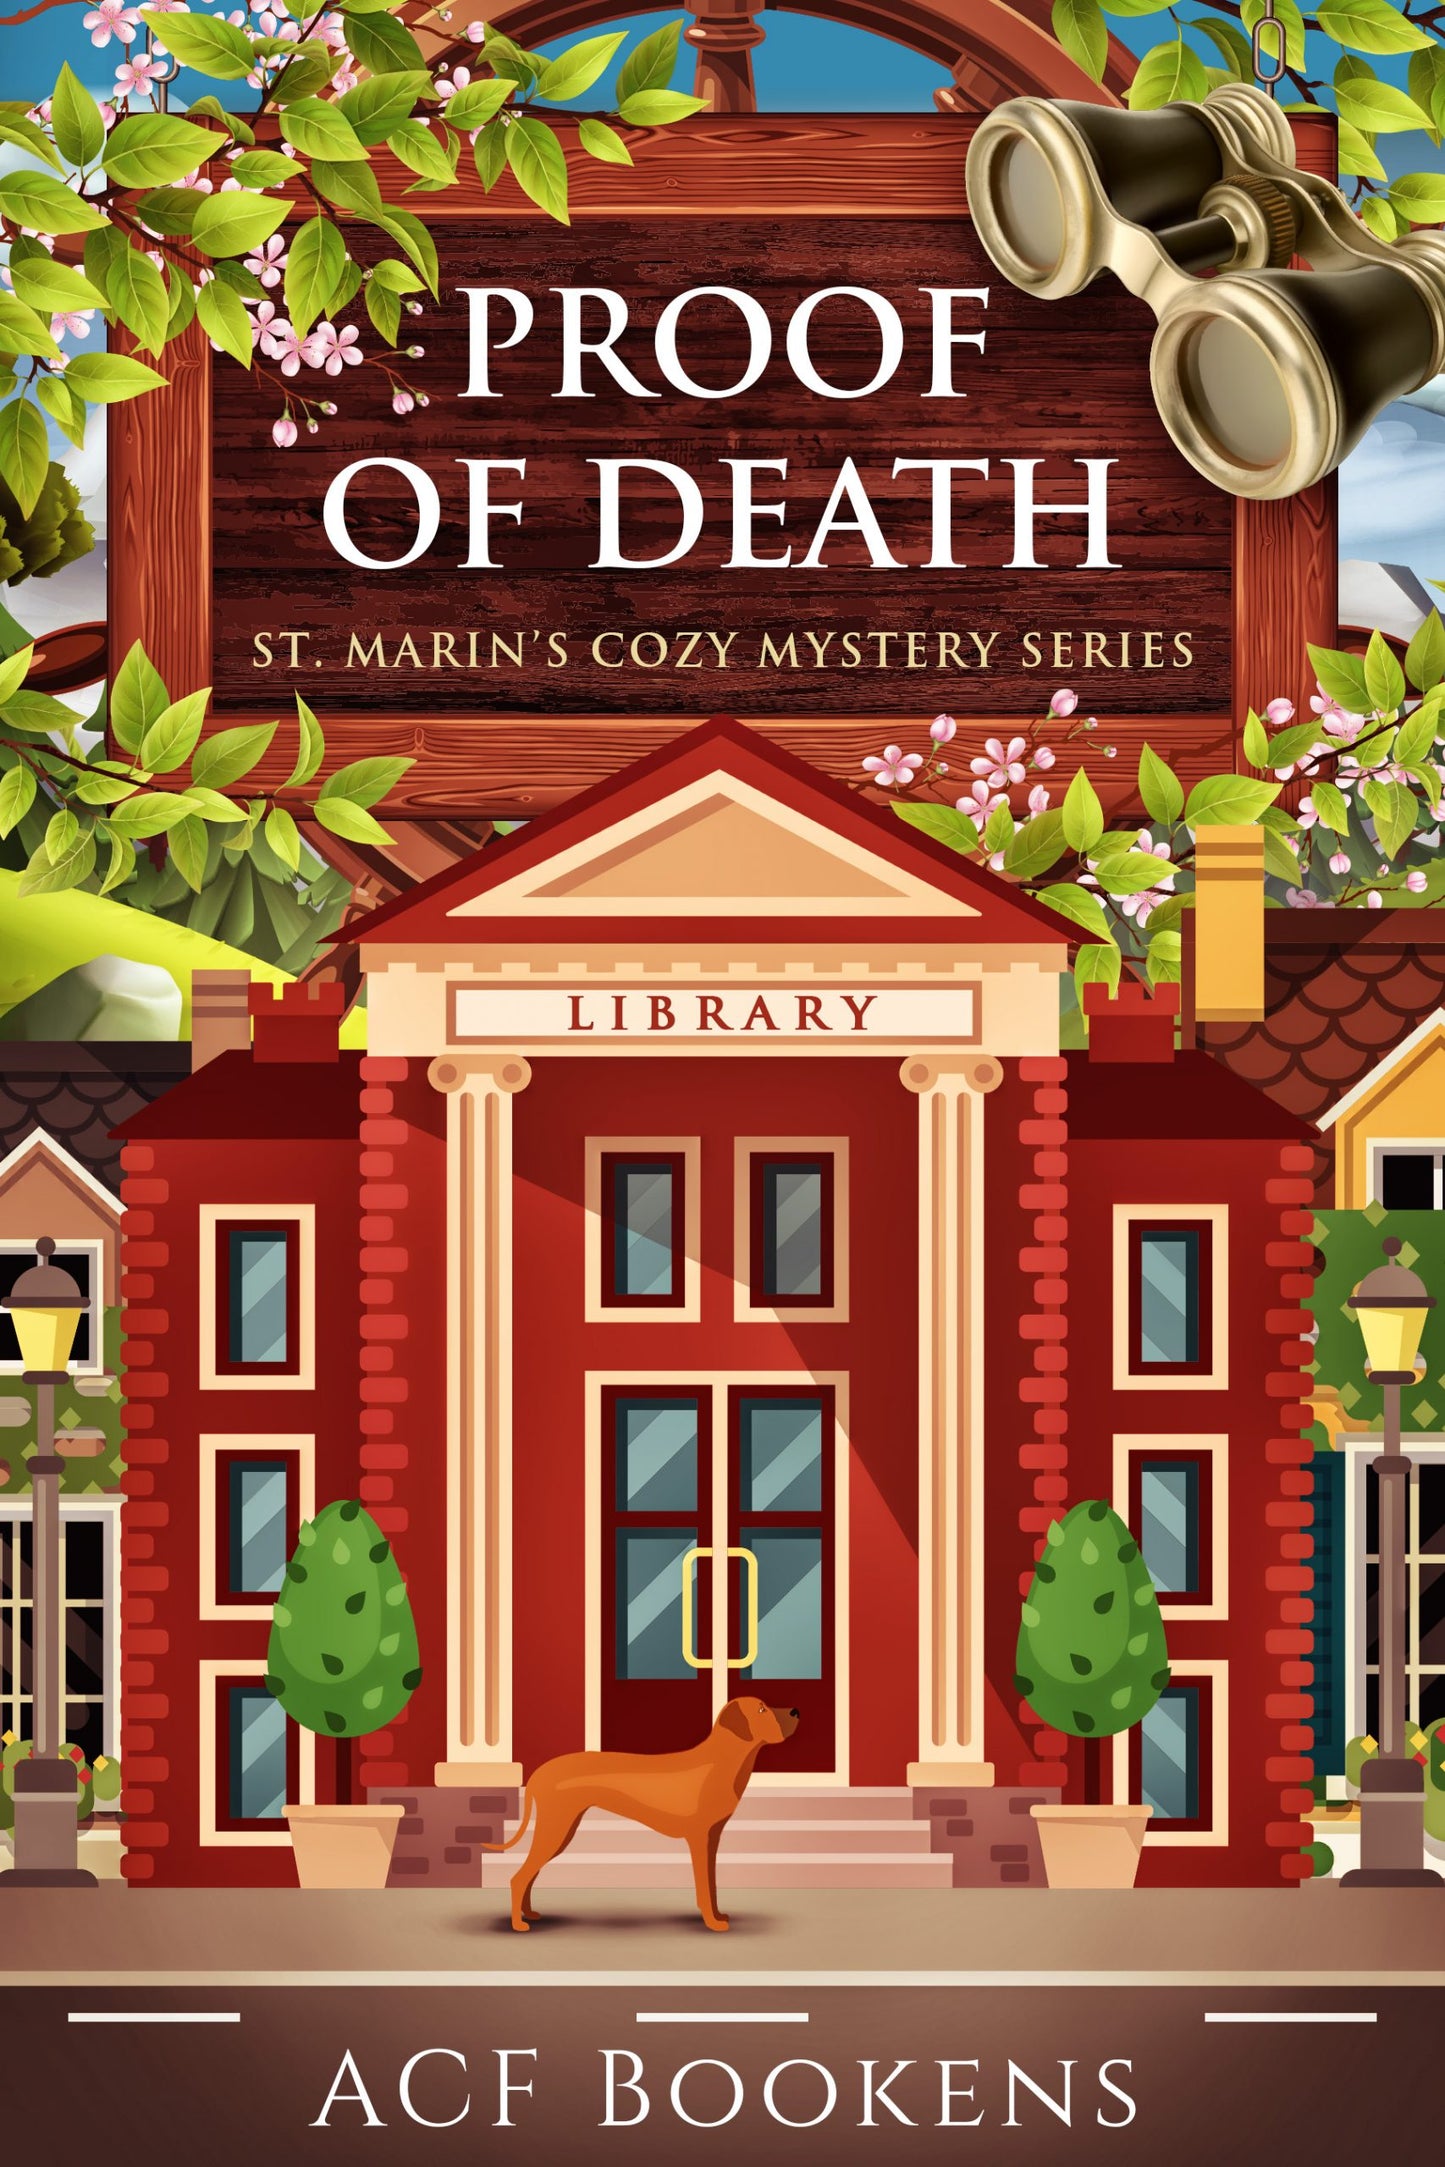 Proof Of Death (St. Marin's Cozy Mystery Series Book 7)